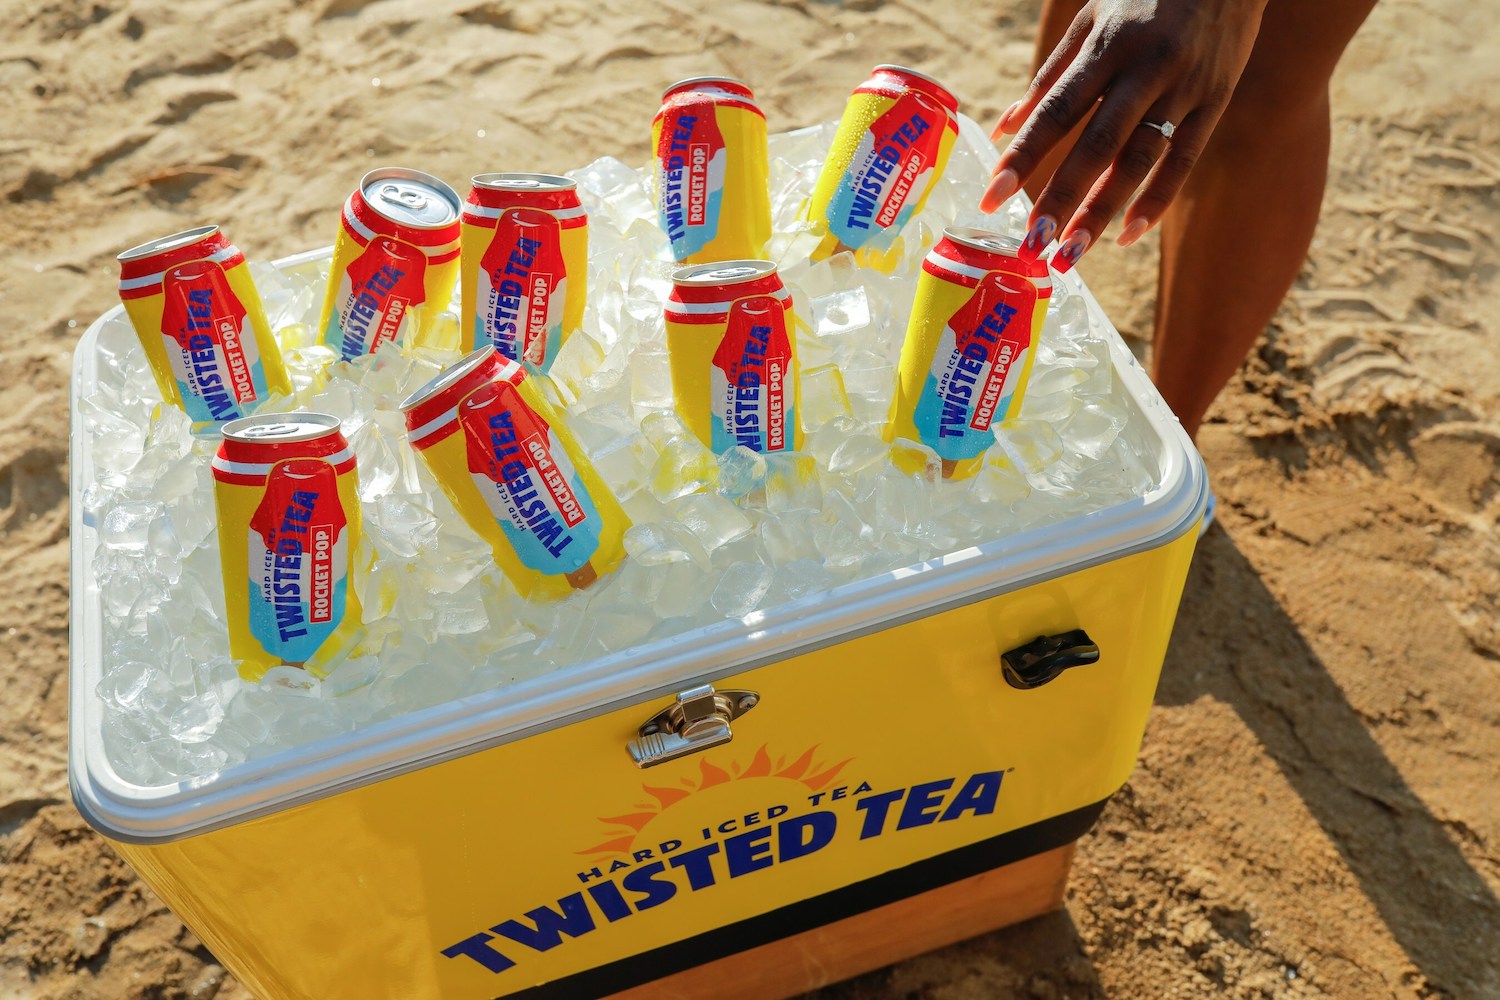 a cooler full of ice and Twister Tea Rocket Pop on a beach